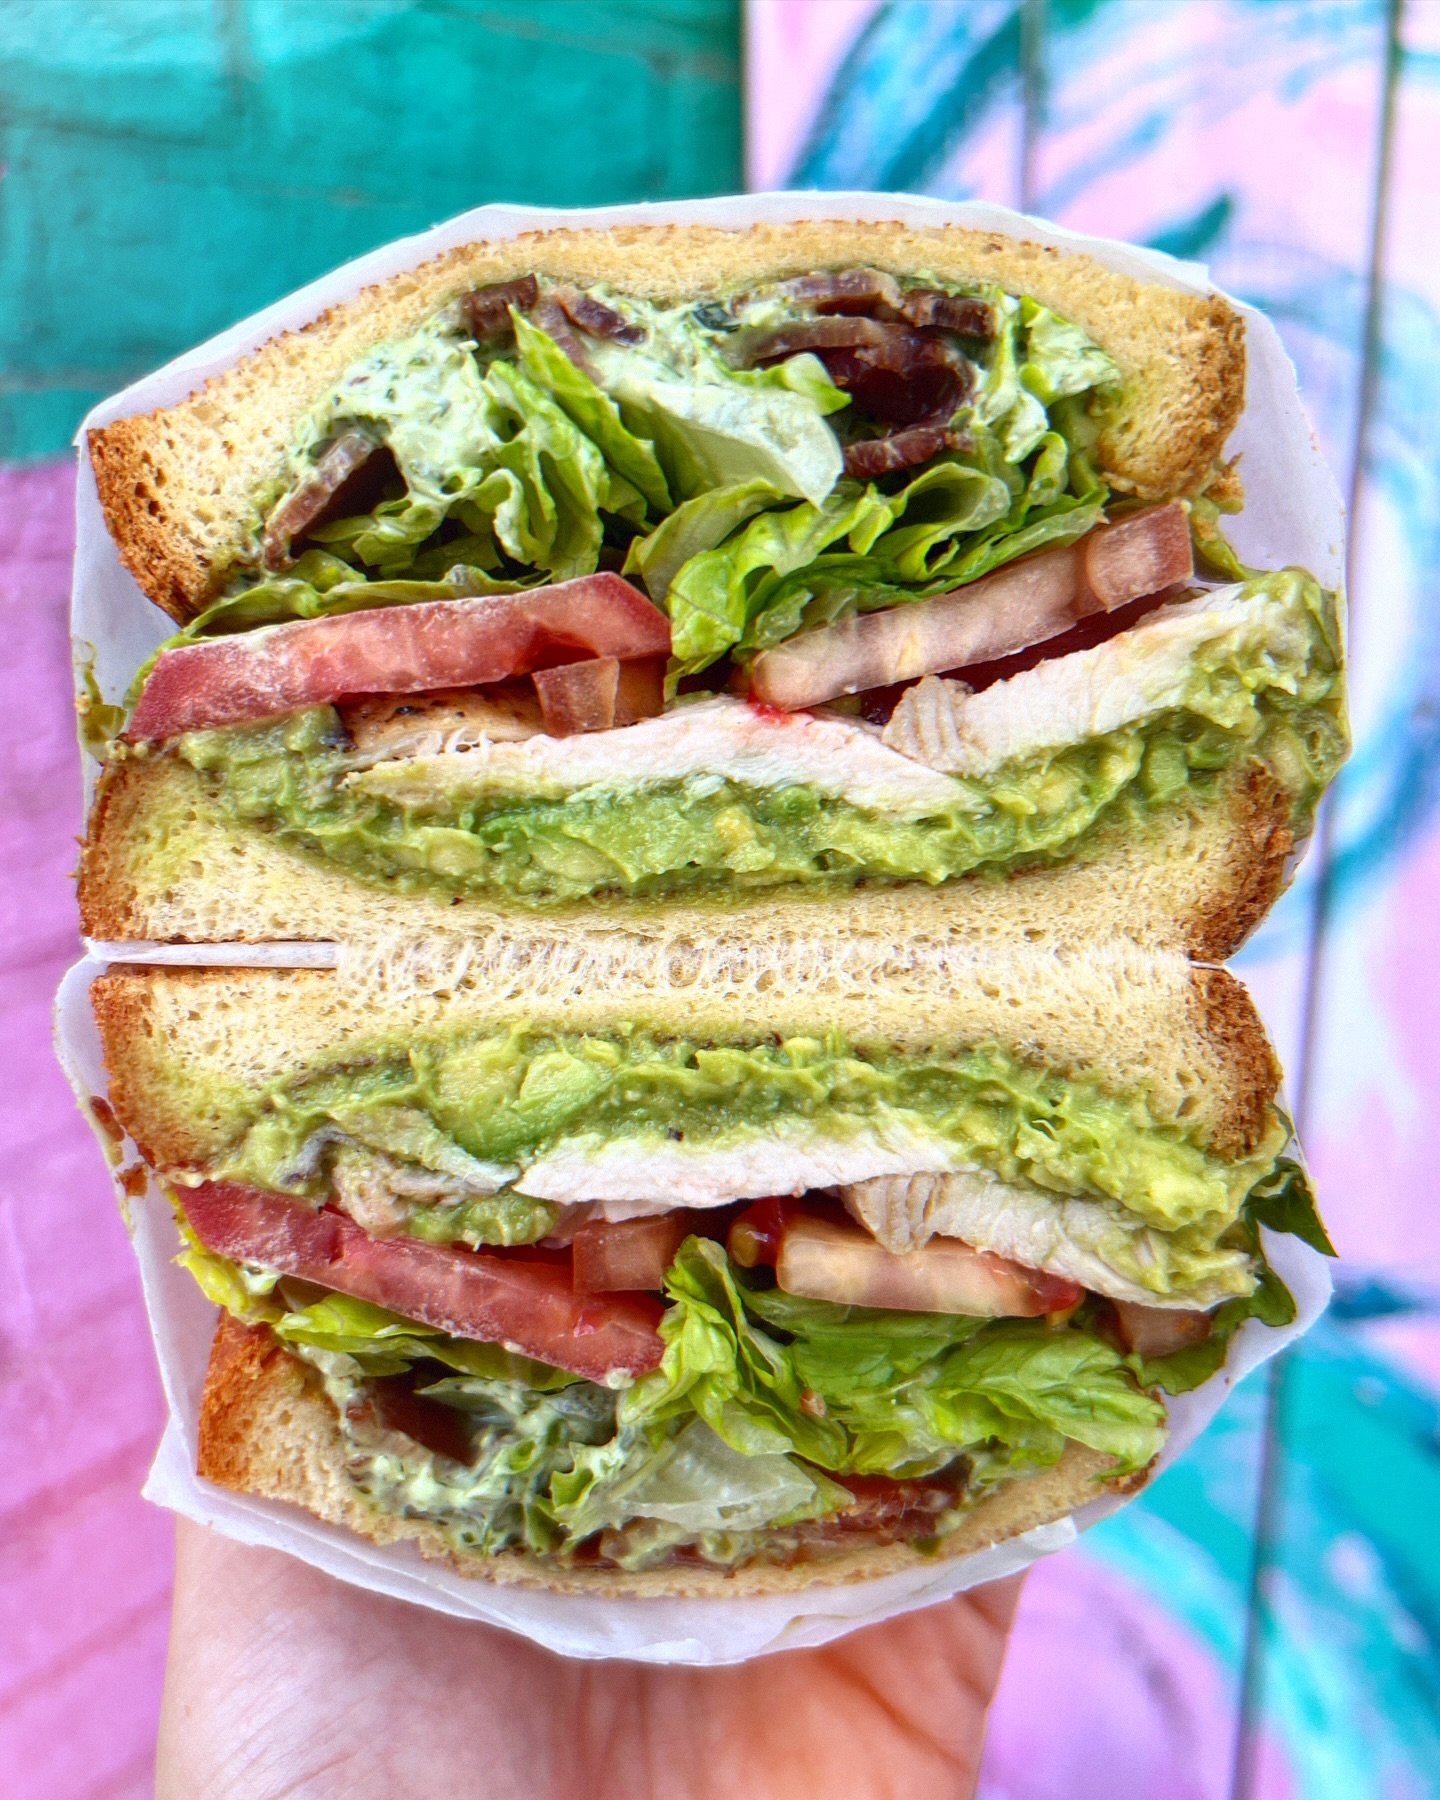 HAPPY #LUNCHTIME FROM THIS BLTA(vocado) ON CHALLAH TO YOUR TUMTUM. 😋🥓🥬🍅🧨🥑💣 #jalapenoherbmayo